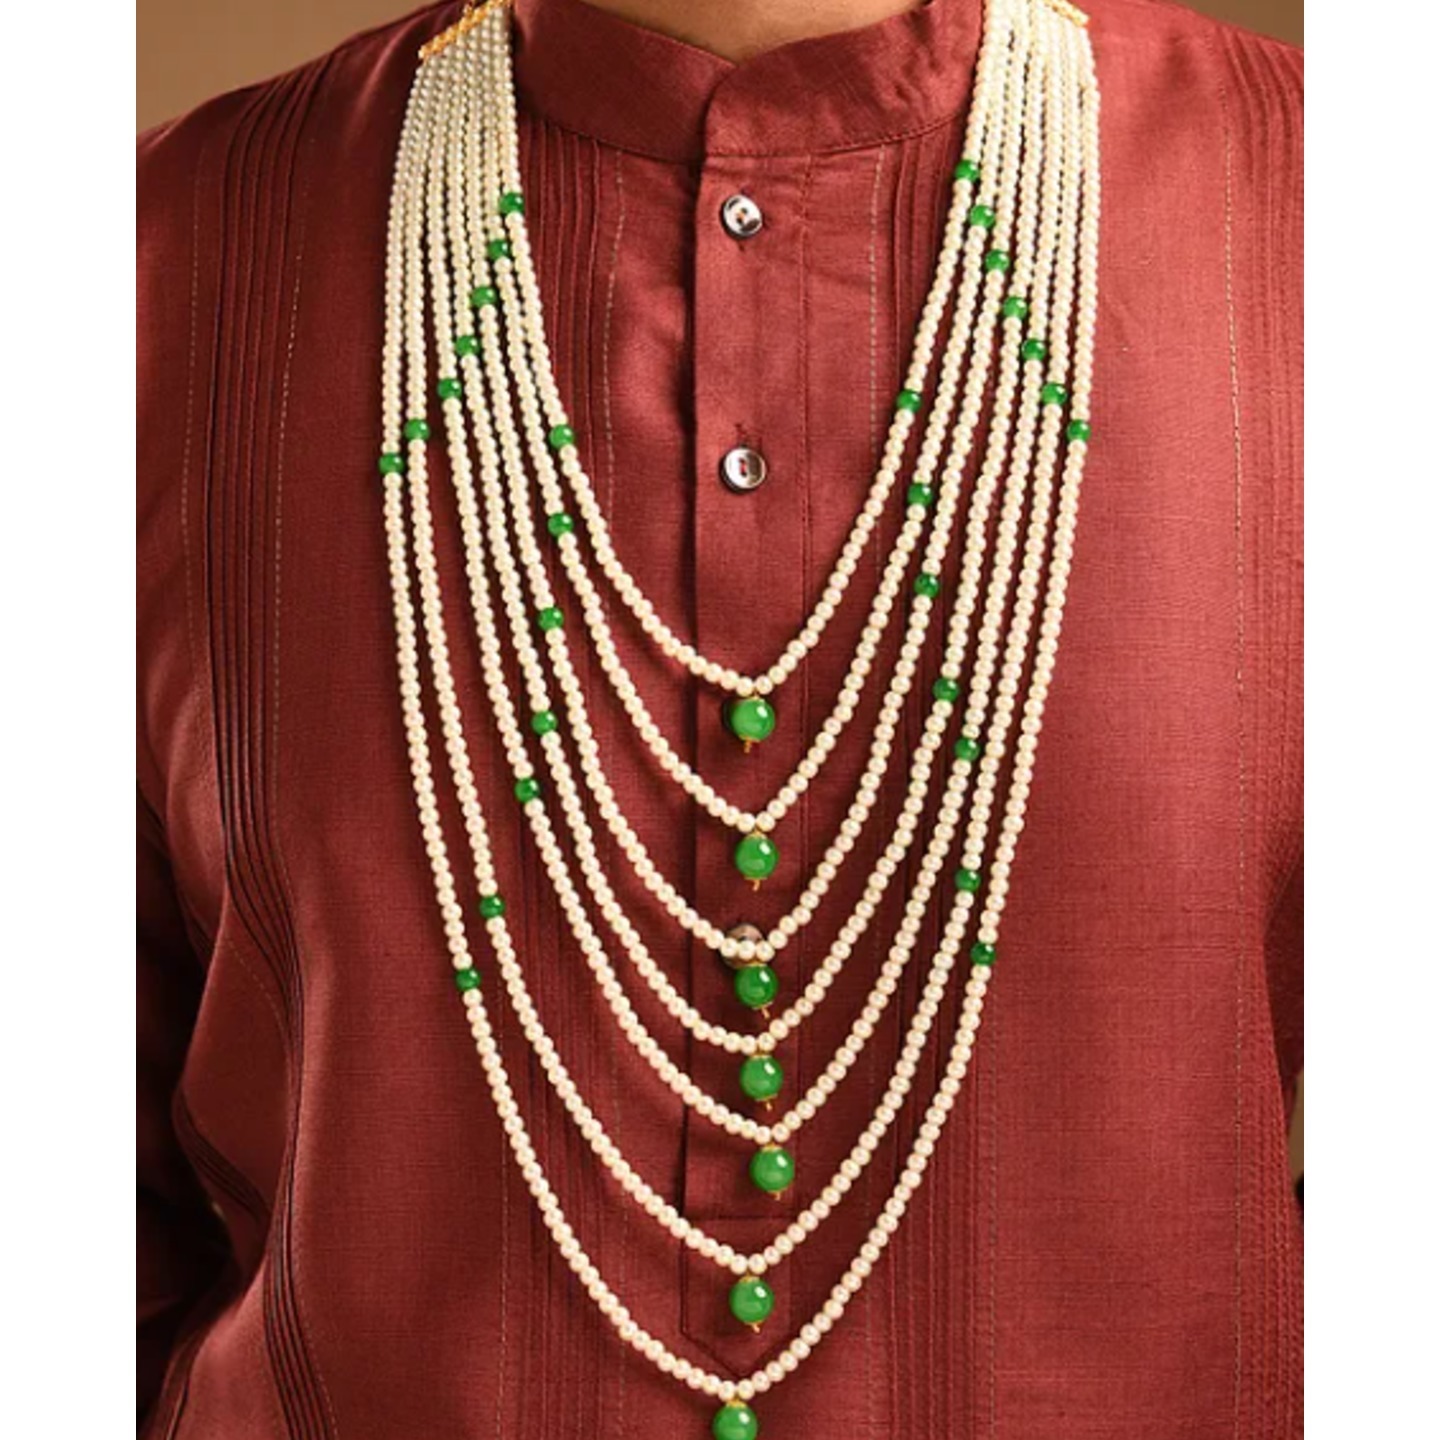 Green White Beaded Layered Necklace Onyx Perals For Men